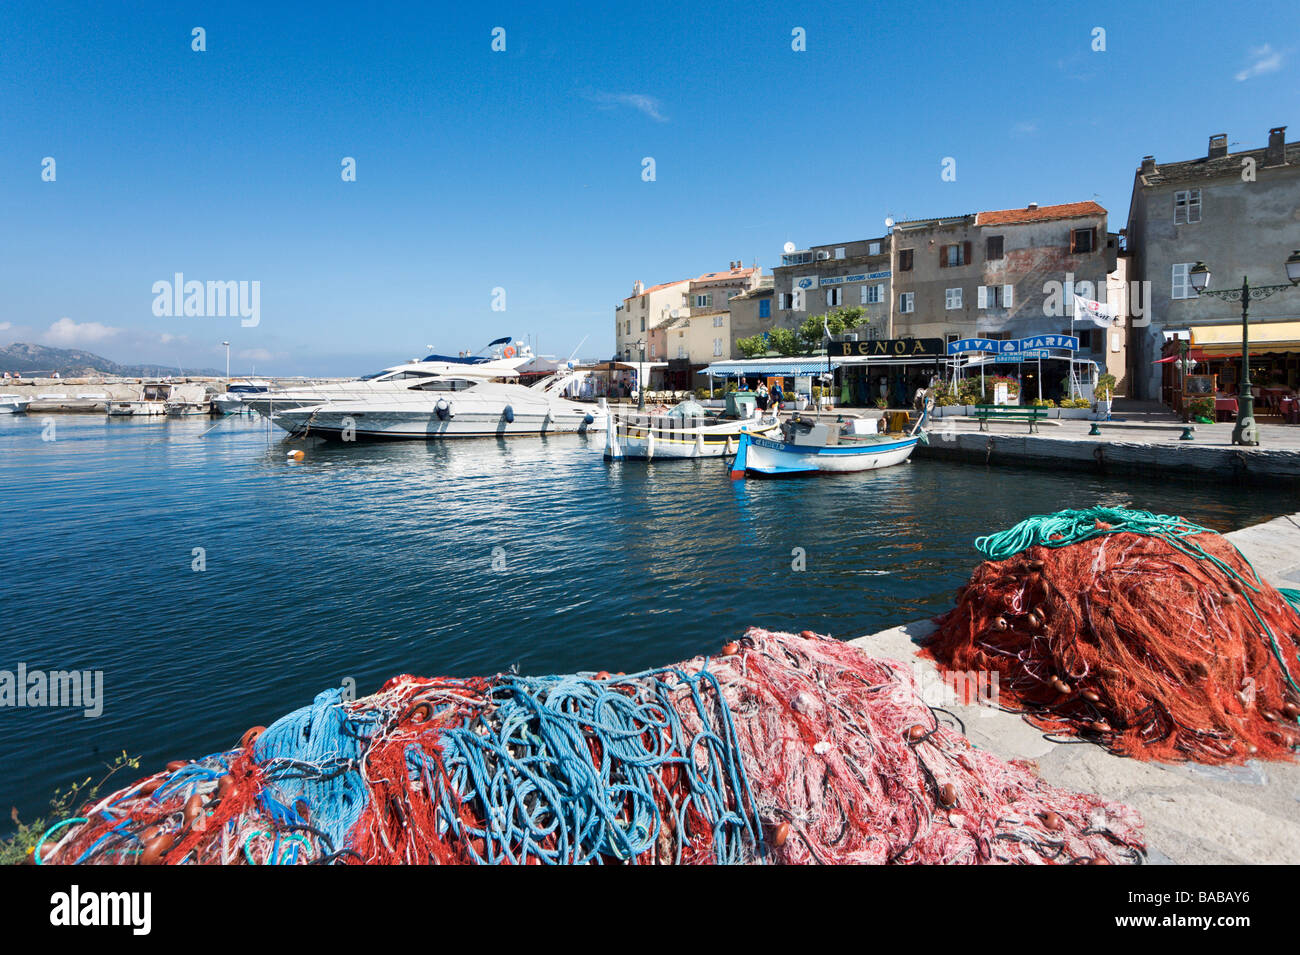 Luxury yachts and fishing boats in the harbour at St Florent, The Nebbio, Corsica, France Stock Photo